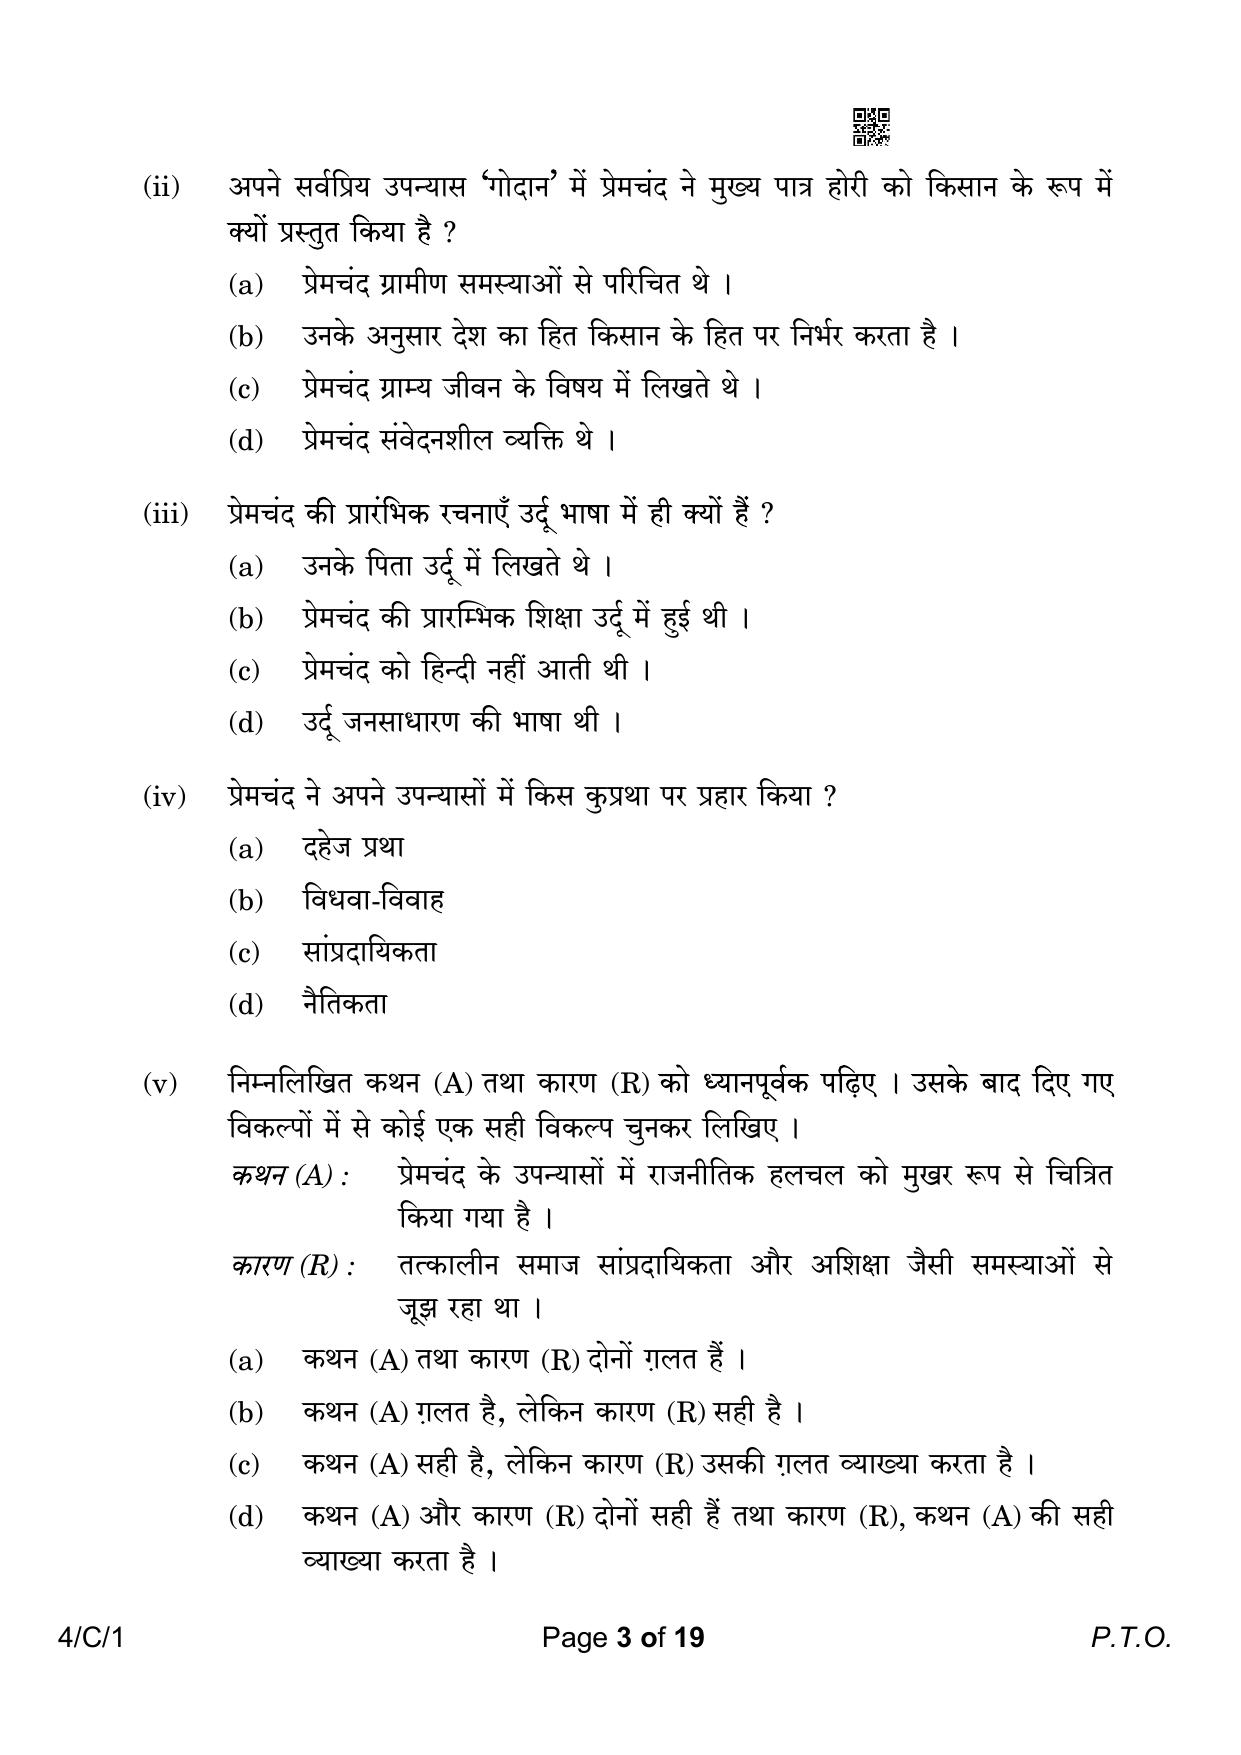 CBSE Class 10 4-1 Hindi B 2023 (Compartment) Question Paper - Page 3